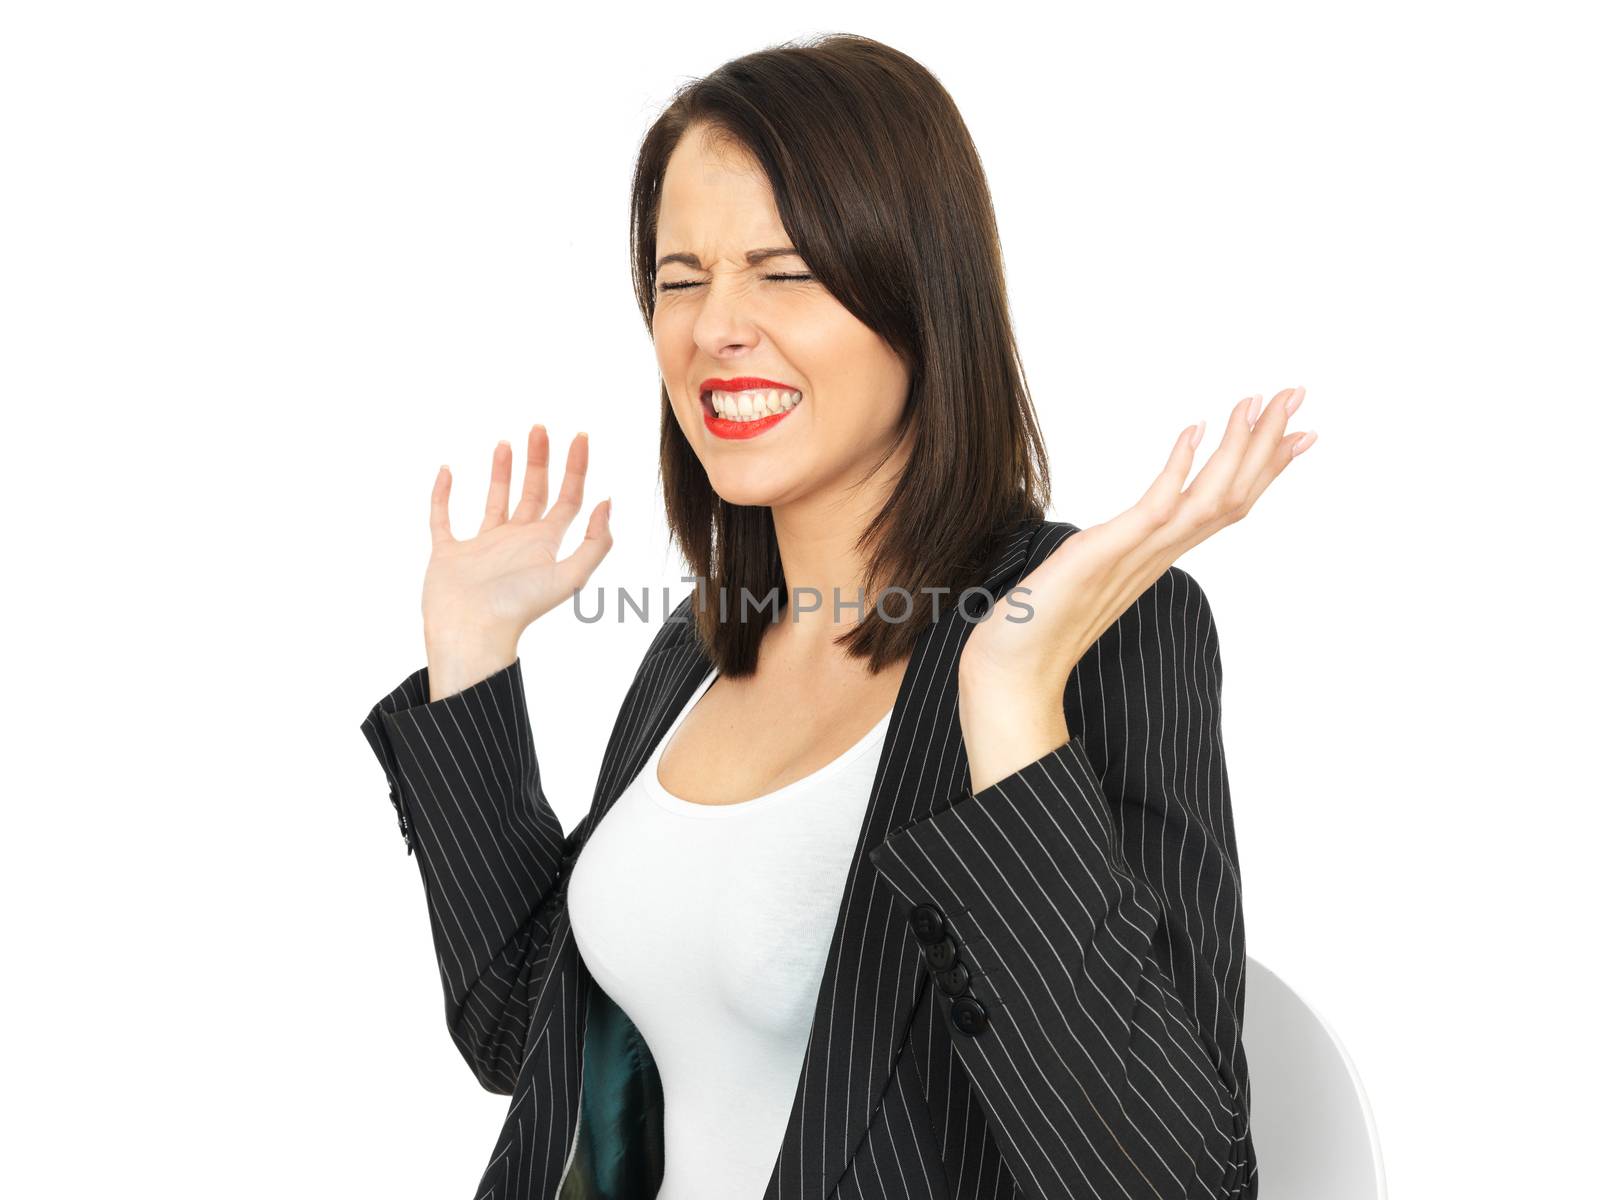 Angry Frustrated Young Business Woman by Whiteboxmedia